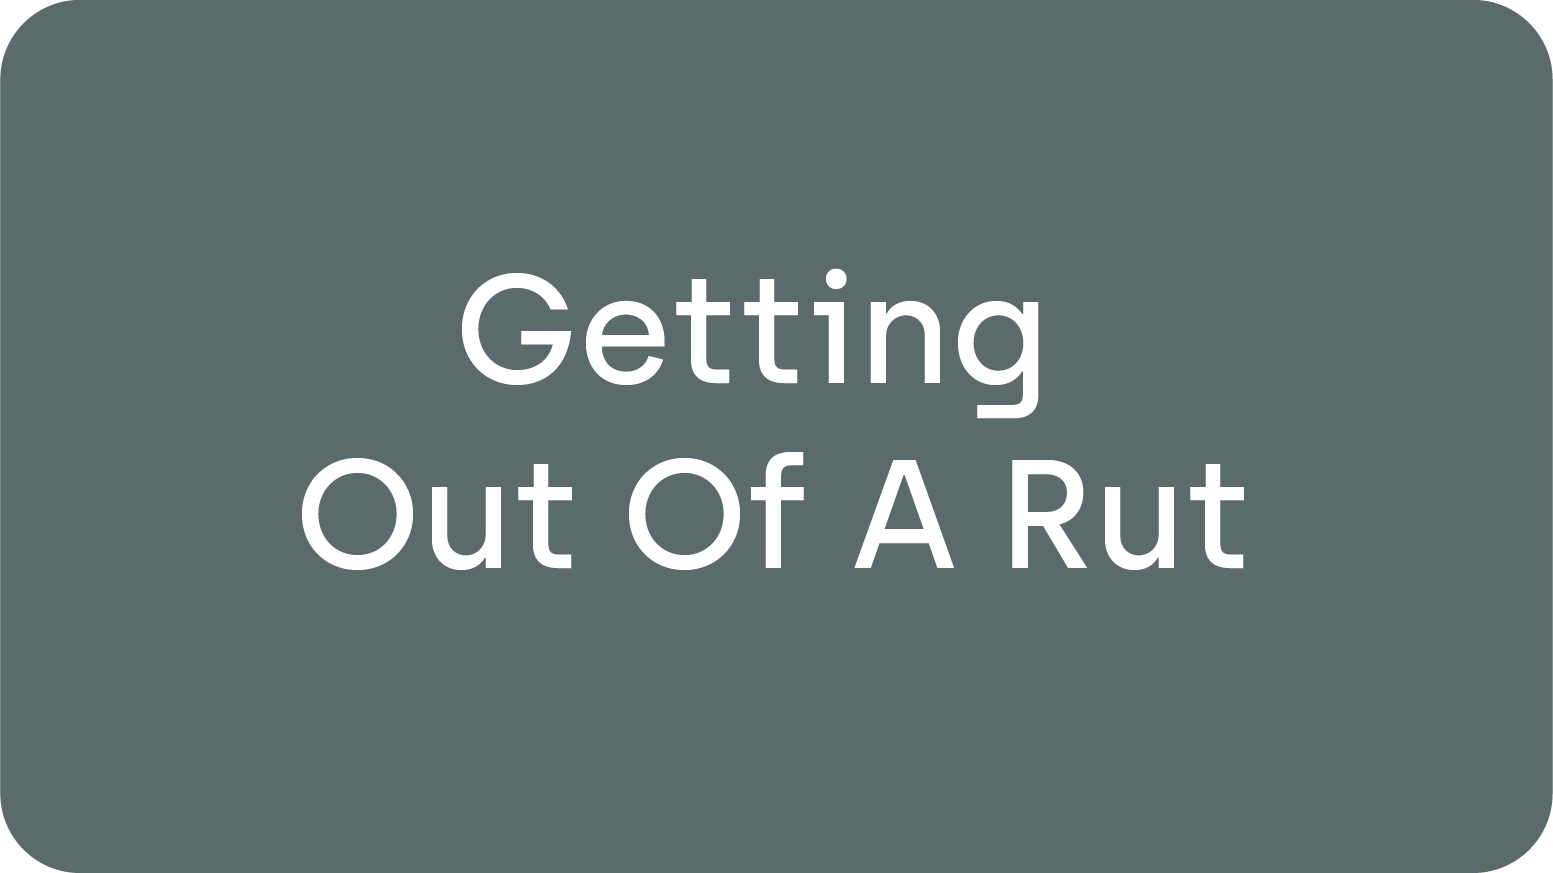 Getting Out Of A Rut